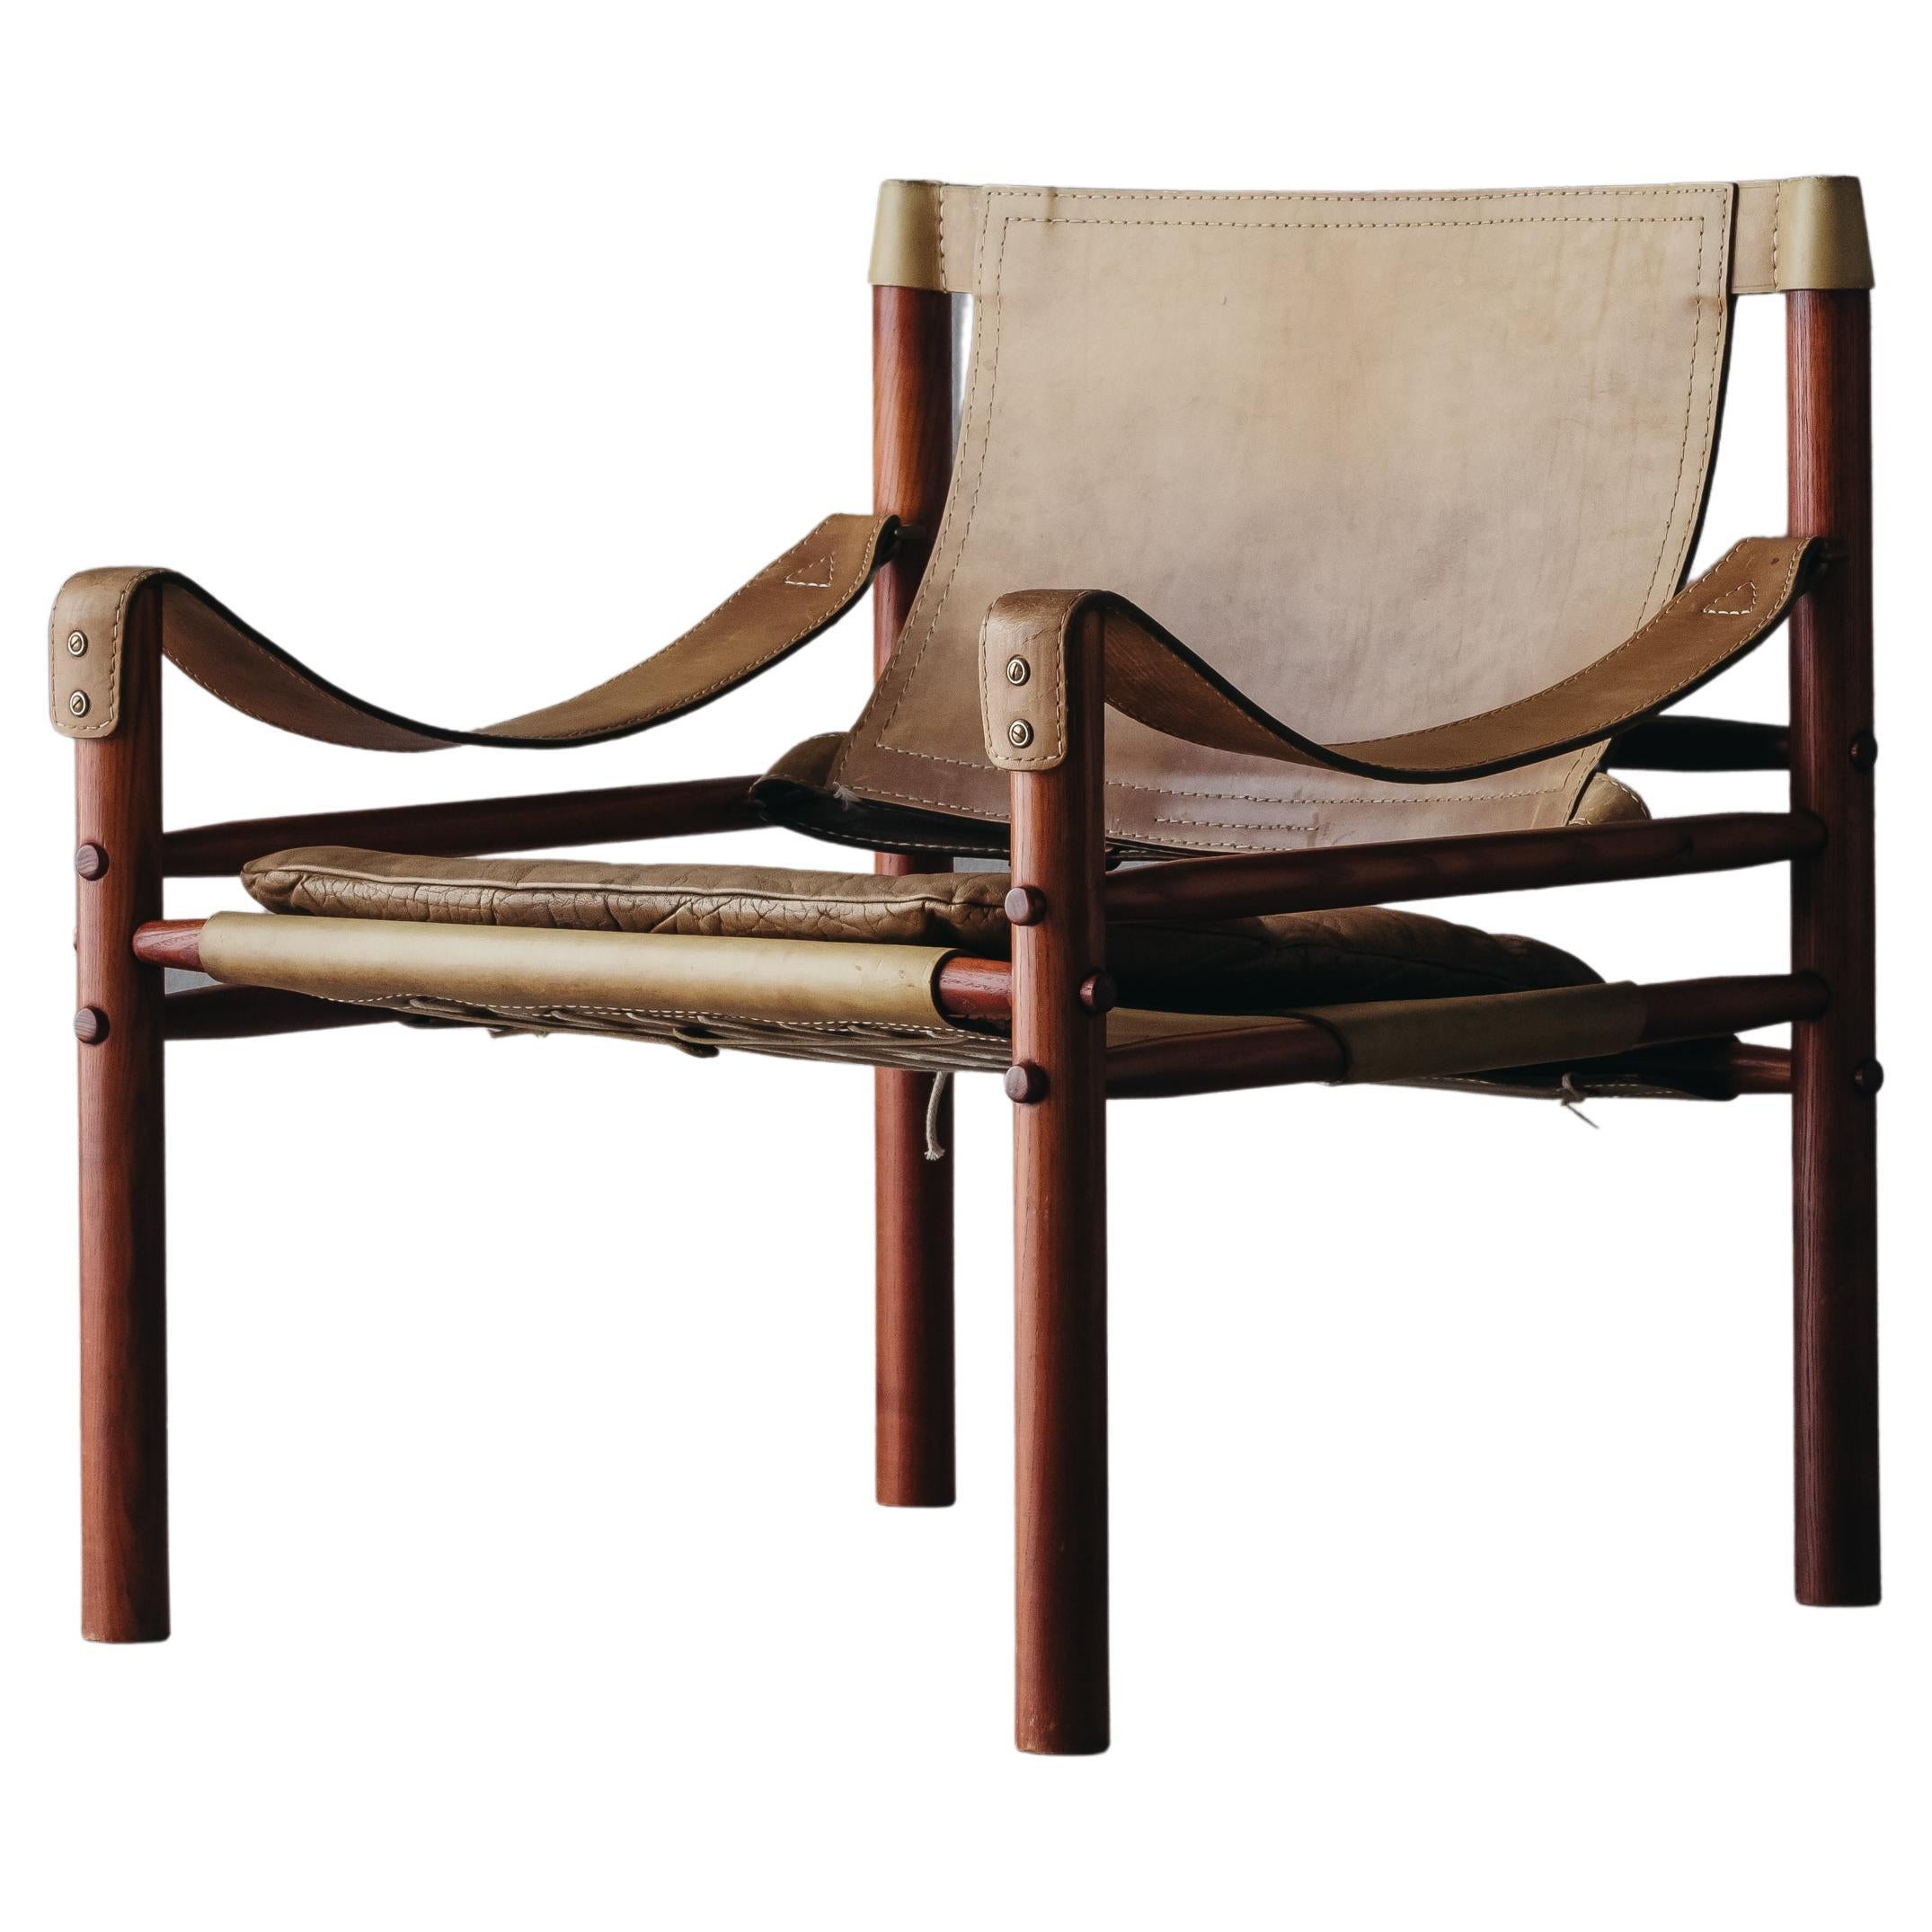 Vintage Arne Norell Lounge Chair, Model Sirocco, Sweden, circa 1970 For Sale